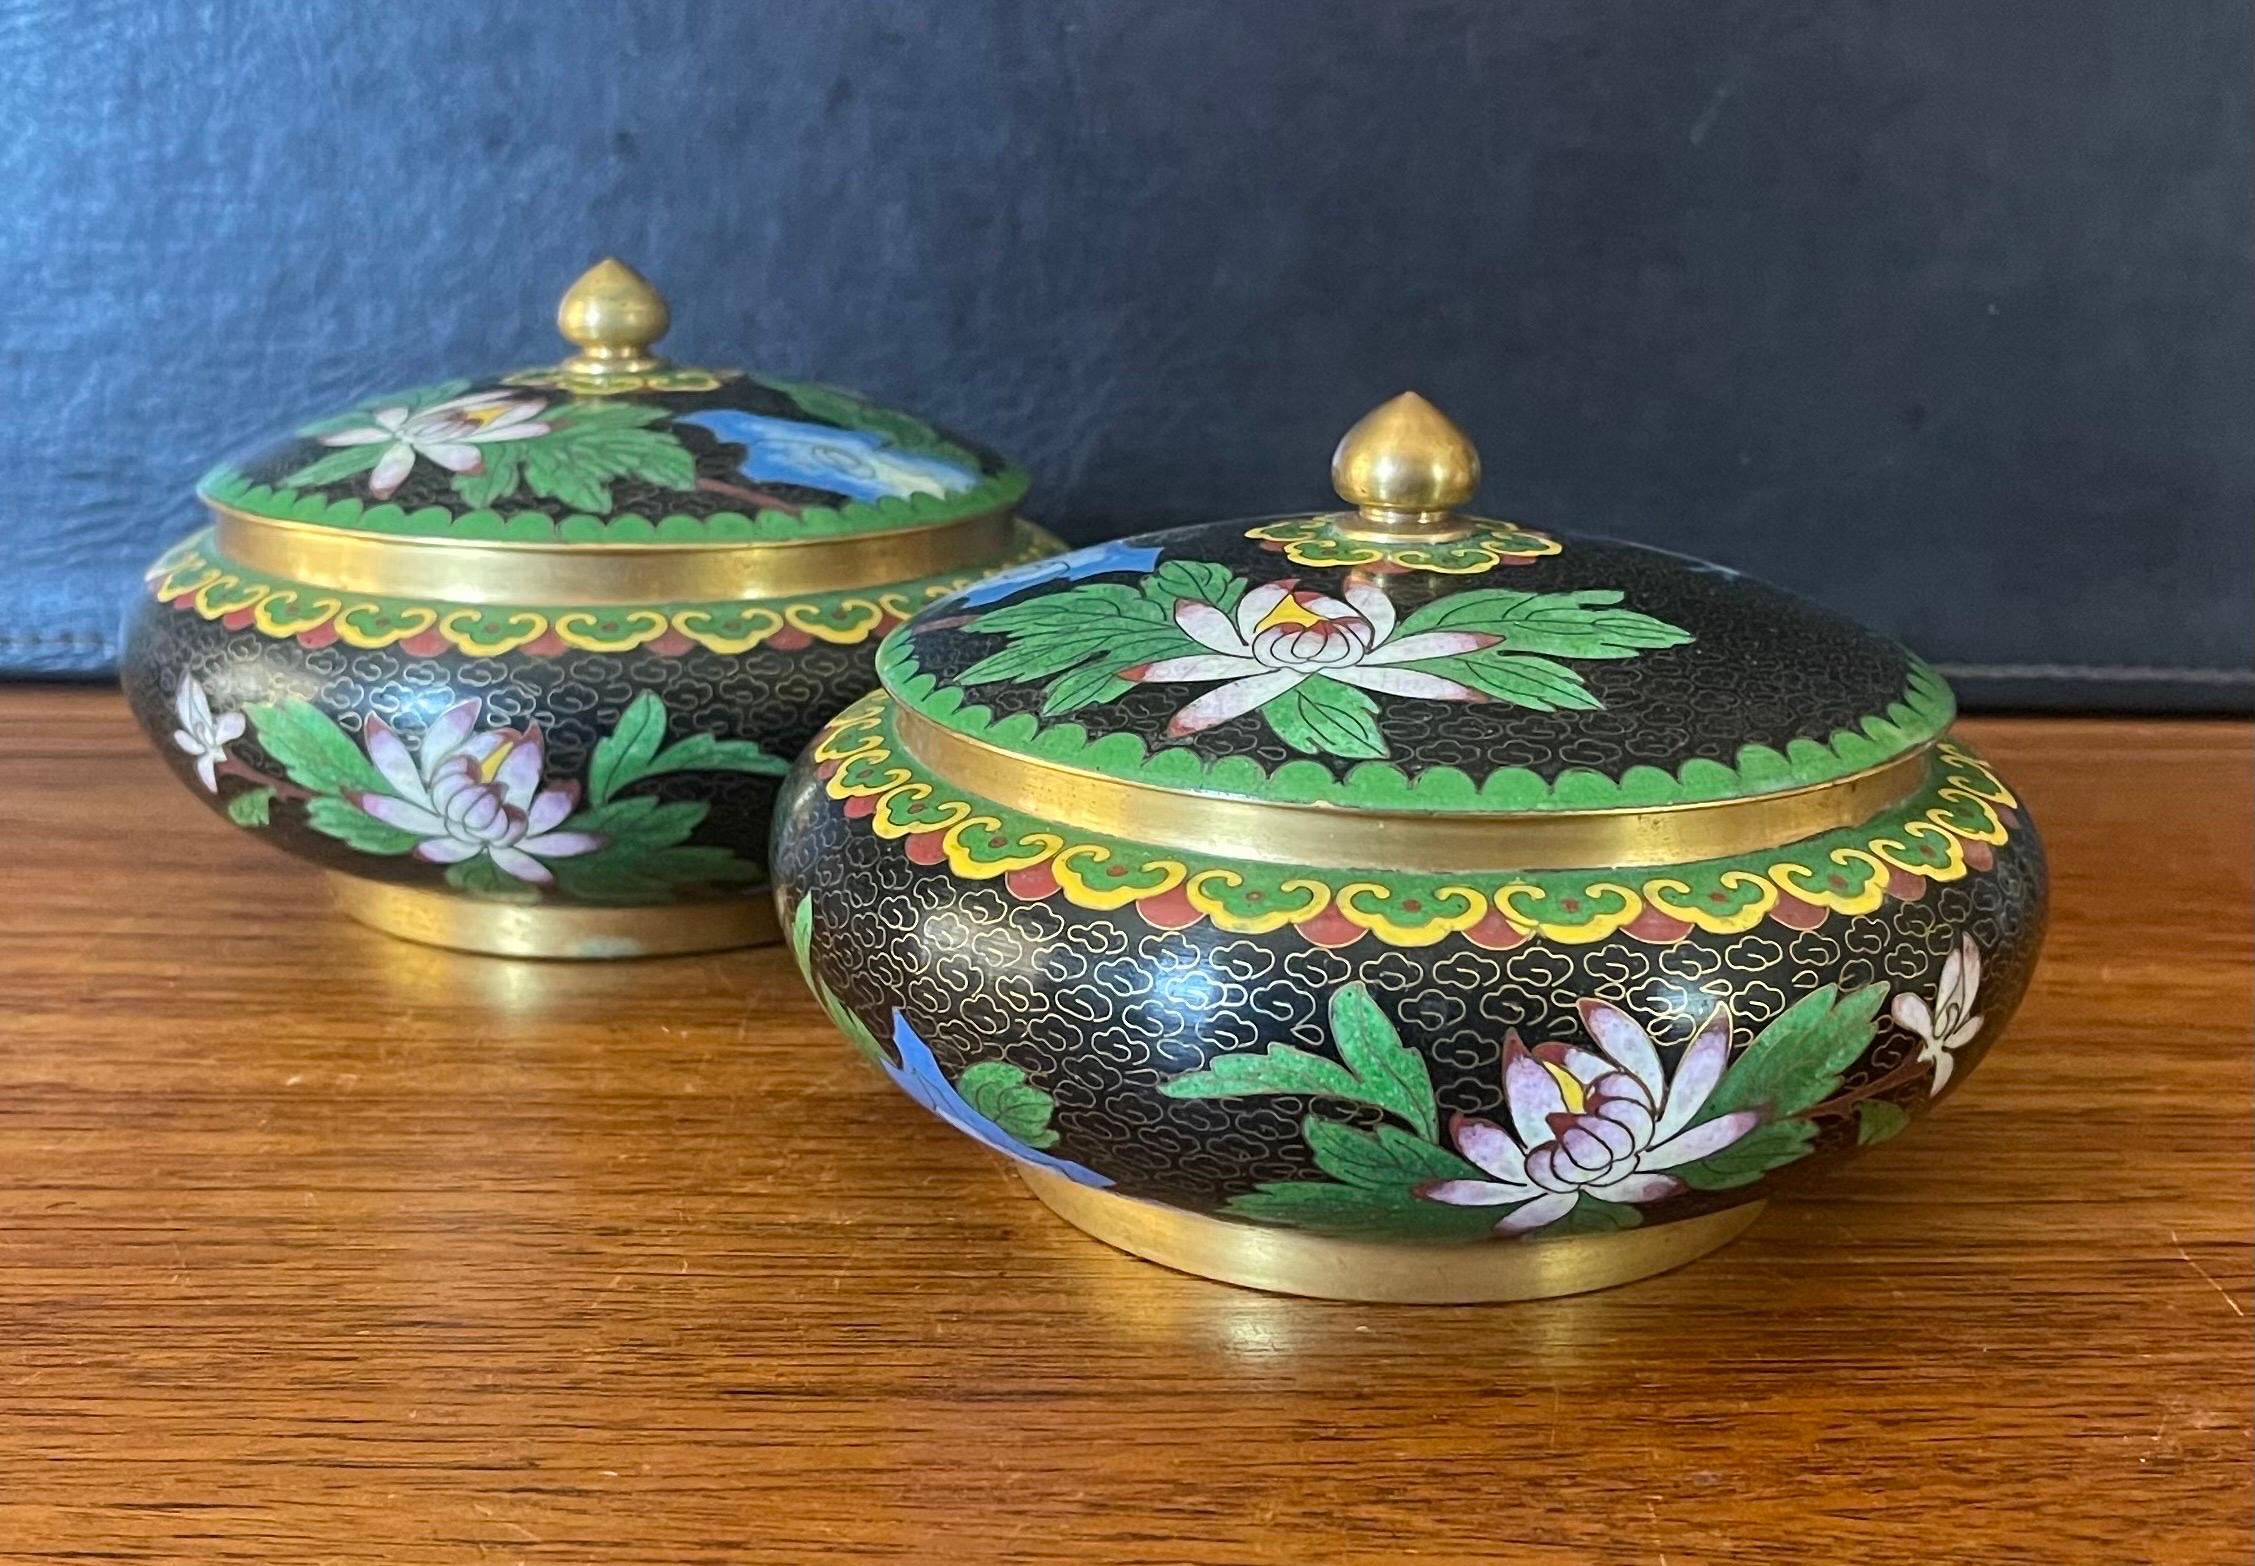 Cloissoné Mirrored Pair of Chinese Cloisonne Lidded Bowls with Floral Motif For Sale